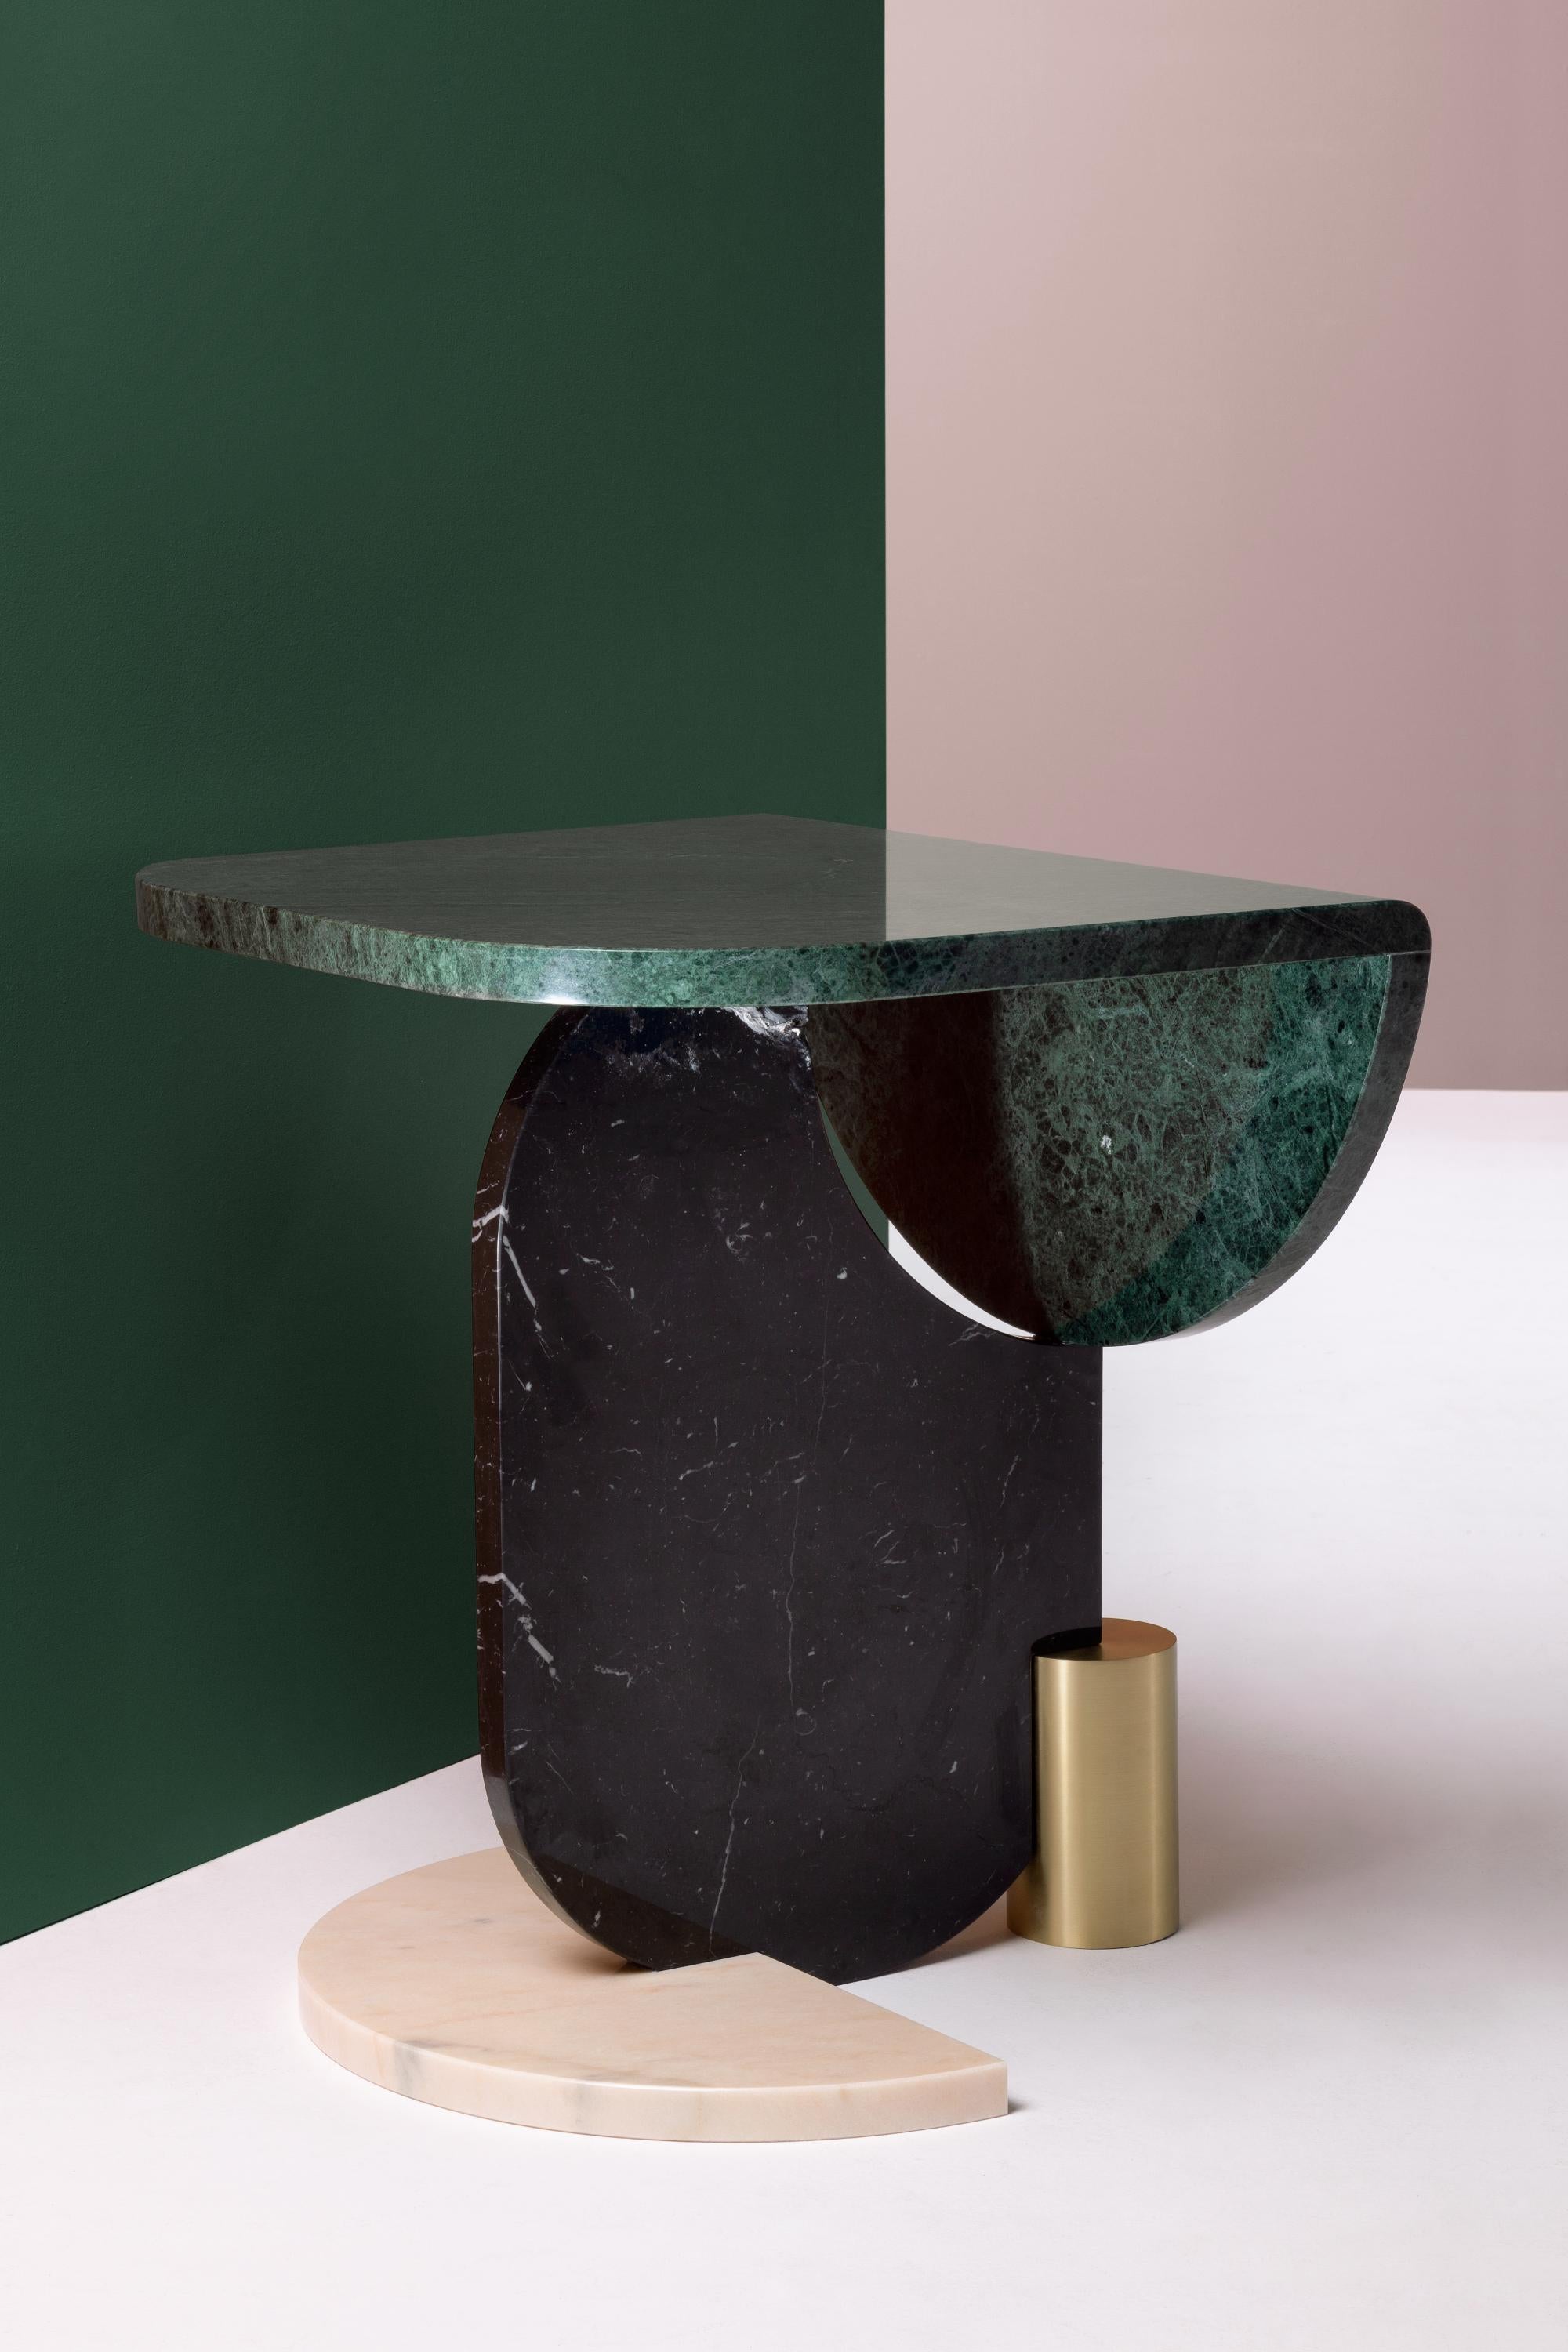 Marble side table by Dooq
Mwasures: W 52 cm 20”
D 60 cm 24”
H 61 cm 24”

Materials: top, oval and half-circle base marble:
guatemala green, estremoz white, estremoz
rose, Carrara, nero marquina, emperador
metal base polished/satin brass, copper